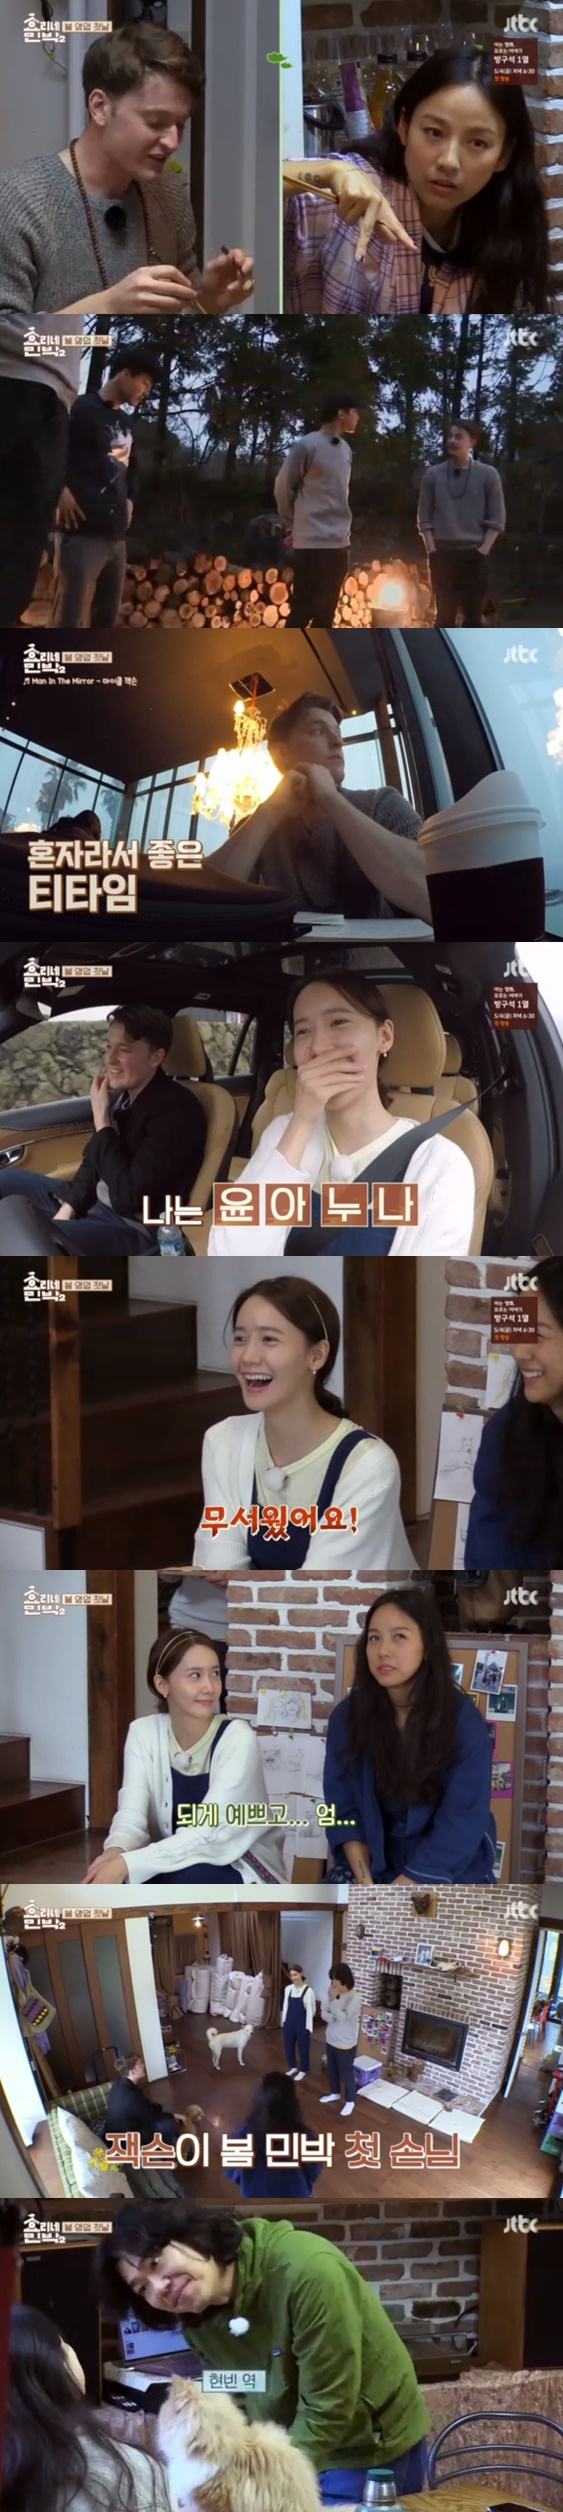 Hyeori House B & B 2 started Sogilly Boom sales.The JTBC entertainment program Hyeori House B & B 2 broadcasted on the 22nd showed the start of Boom-inn.Sogilgri Hyeori House Minshuku greeted Boom.Yoona, who went to Japan during the holiday, gave Lee Hyori a 3 cm tall insole, giving Hyeori a pleasure.The first guest of the day was Jackson from the United States.It was the first foreign guest of Hyeori House Minshuku 2.Lee Hyori seemed to be in a panic for a while for foreign languages, but gladly greeted foreigners who visited their own inn.More than anything, Lee Hyori s fluent English language skills got a lot of attention.Foreigners customers are also good at English language.I was surprised, Lee Hyori praised.Sansun also cared for customers with fluent ability.Yoona tried to communicate confidently.Yoona rides foreigners to the beach.Yoona asked Jackson about his age and Jackson said he was 25 years old.Then Jackson told Yoona that he was 29 years old, Jackson said I thought 21 murder.Then Yoona said Call me Yoona elder sister, and Jackson called older sister.The second guest was two bike men who came aboard ships from Mokpo.Two people who arrived three hours late due to bad weather panicked with the word foreigners who came before us.Two people say that they can not do English language well, I worried about how it would suit a foreign customer.Afterwards Jackson who went sightseeing alone came back and the sad story of Jackson and other guests began.I could not make myself understood, but their conversation led to OK, together.There was a language barrier, but only the mind was through.After that guests had dinner with Hyeori House 2 employees.Dialogue between Korean and English language came on and off the table.Lee Hyori asked Jackson how old you looked at Jackson and said that he looked like 38 years old and made me fleshly and I was disappointed that it was not so difficult to see like that.After that Jackson said to Sang Sung that Perhaps Lee Hyori seems to be younger than Lee Hyori, he cried Lee Hyori Fire! And invited us to laugh.After eating the rice, Lee Hyori Sansun Yoona and Jackson sat around the table, played the guitar together, sang a song and enjoyed the Boom night.Boom to the right Hyeori House 2 was relaxing and warm.Boom It is noteworthy that some guests also find Hyeori House Minshuku 2 during business.